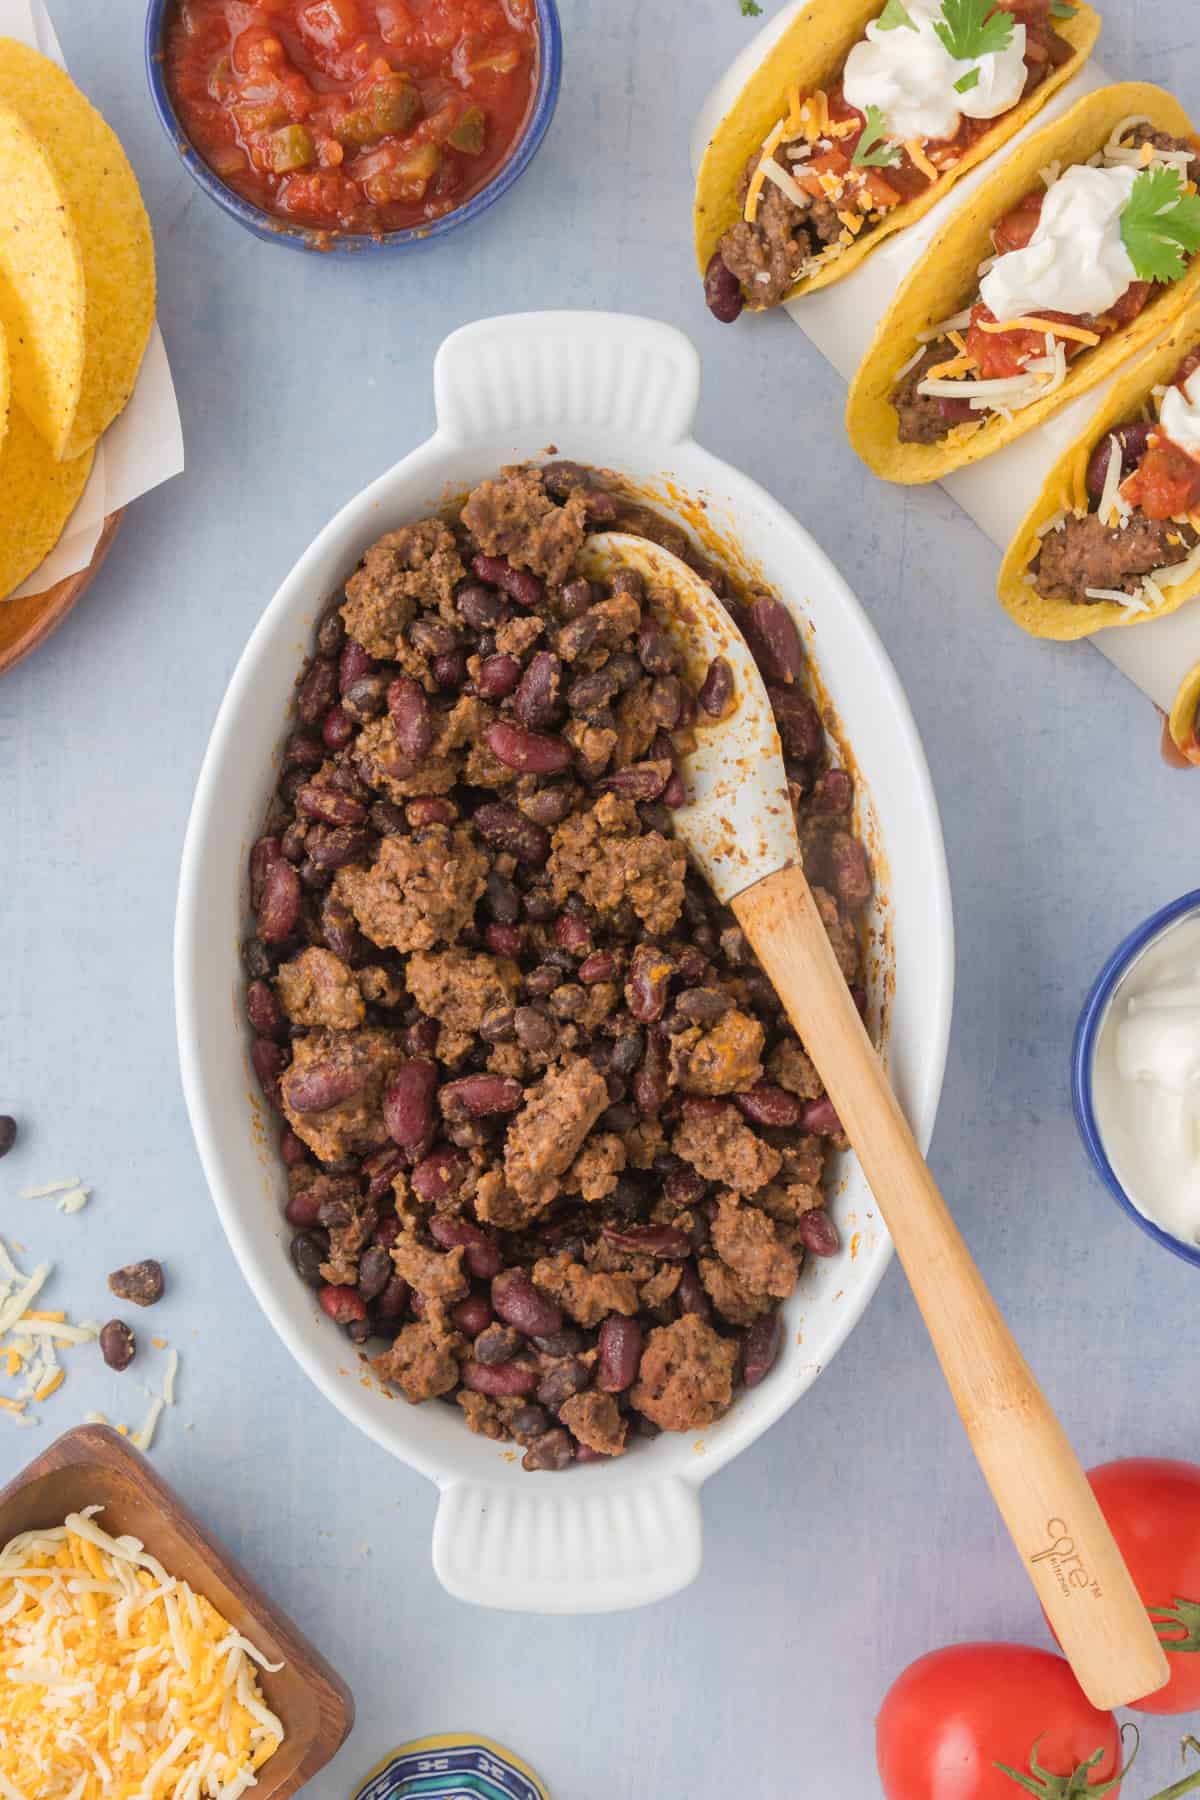 A bowl of slow cooker taco meat with beans, tomatoes and tortillas.